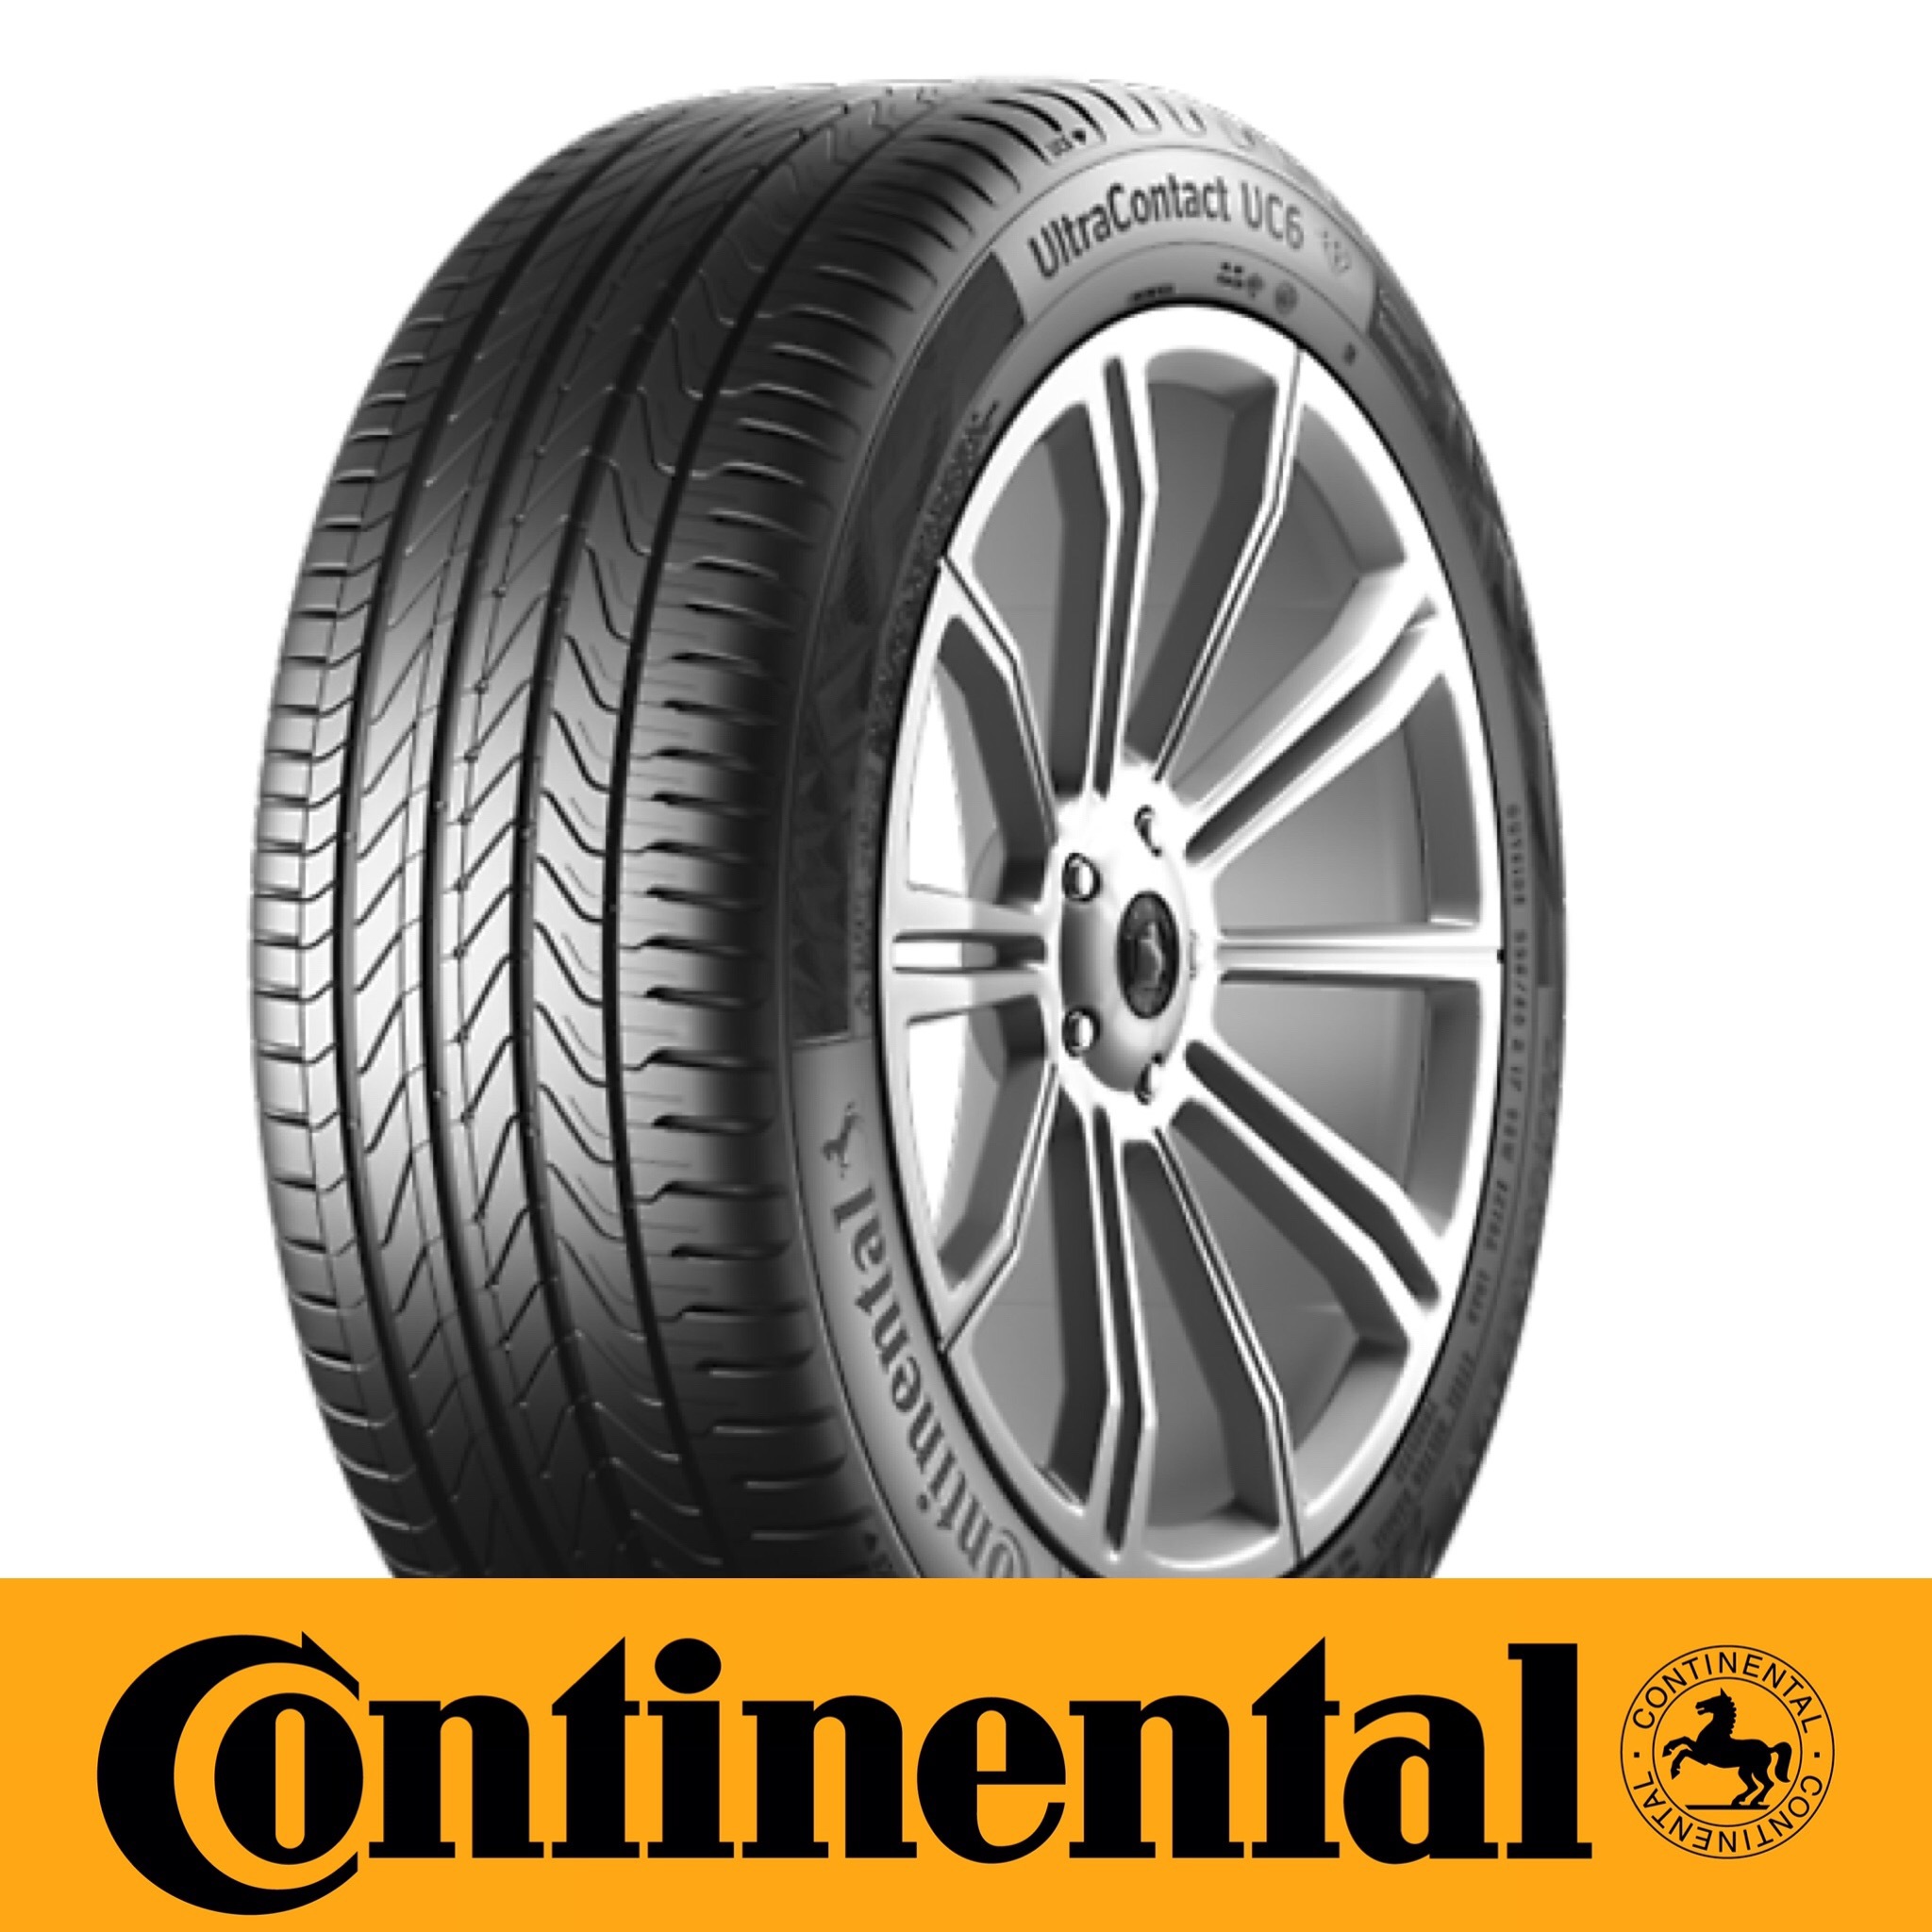 Continental-UltraContact-185-60R15-88H-(b)